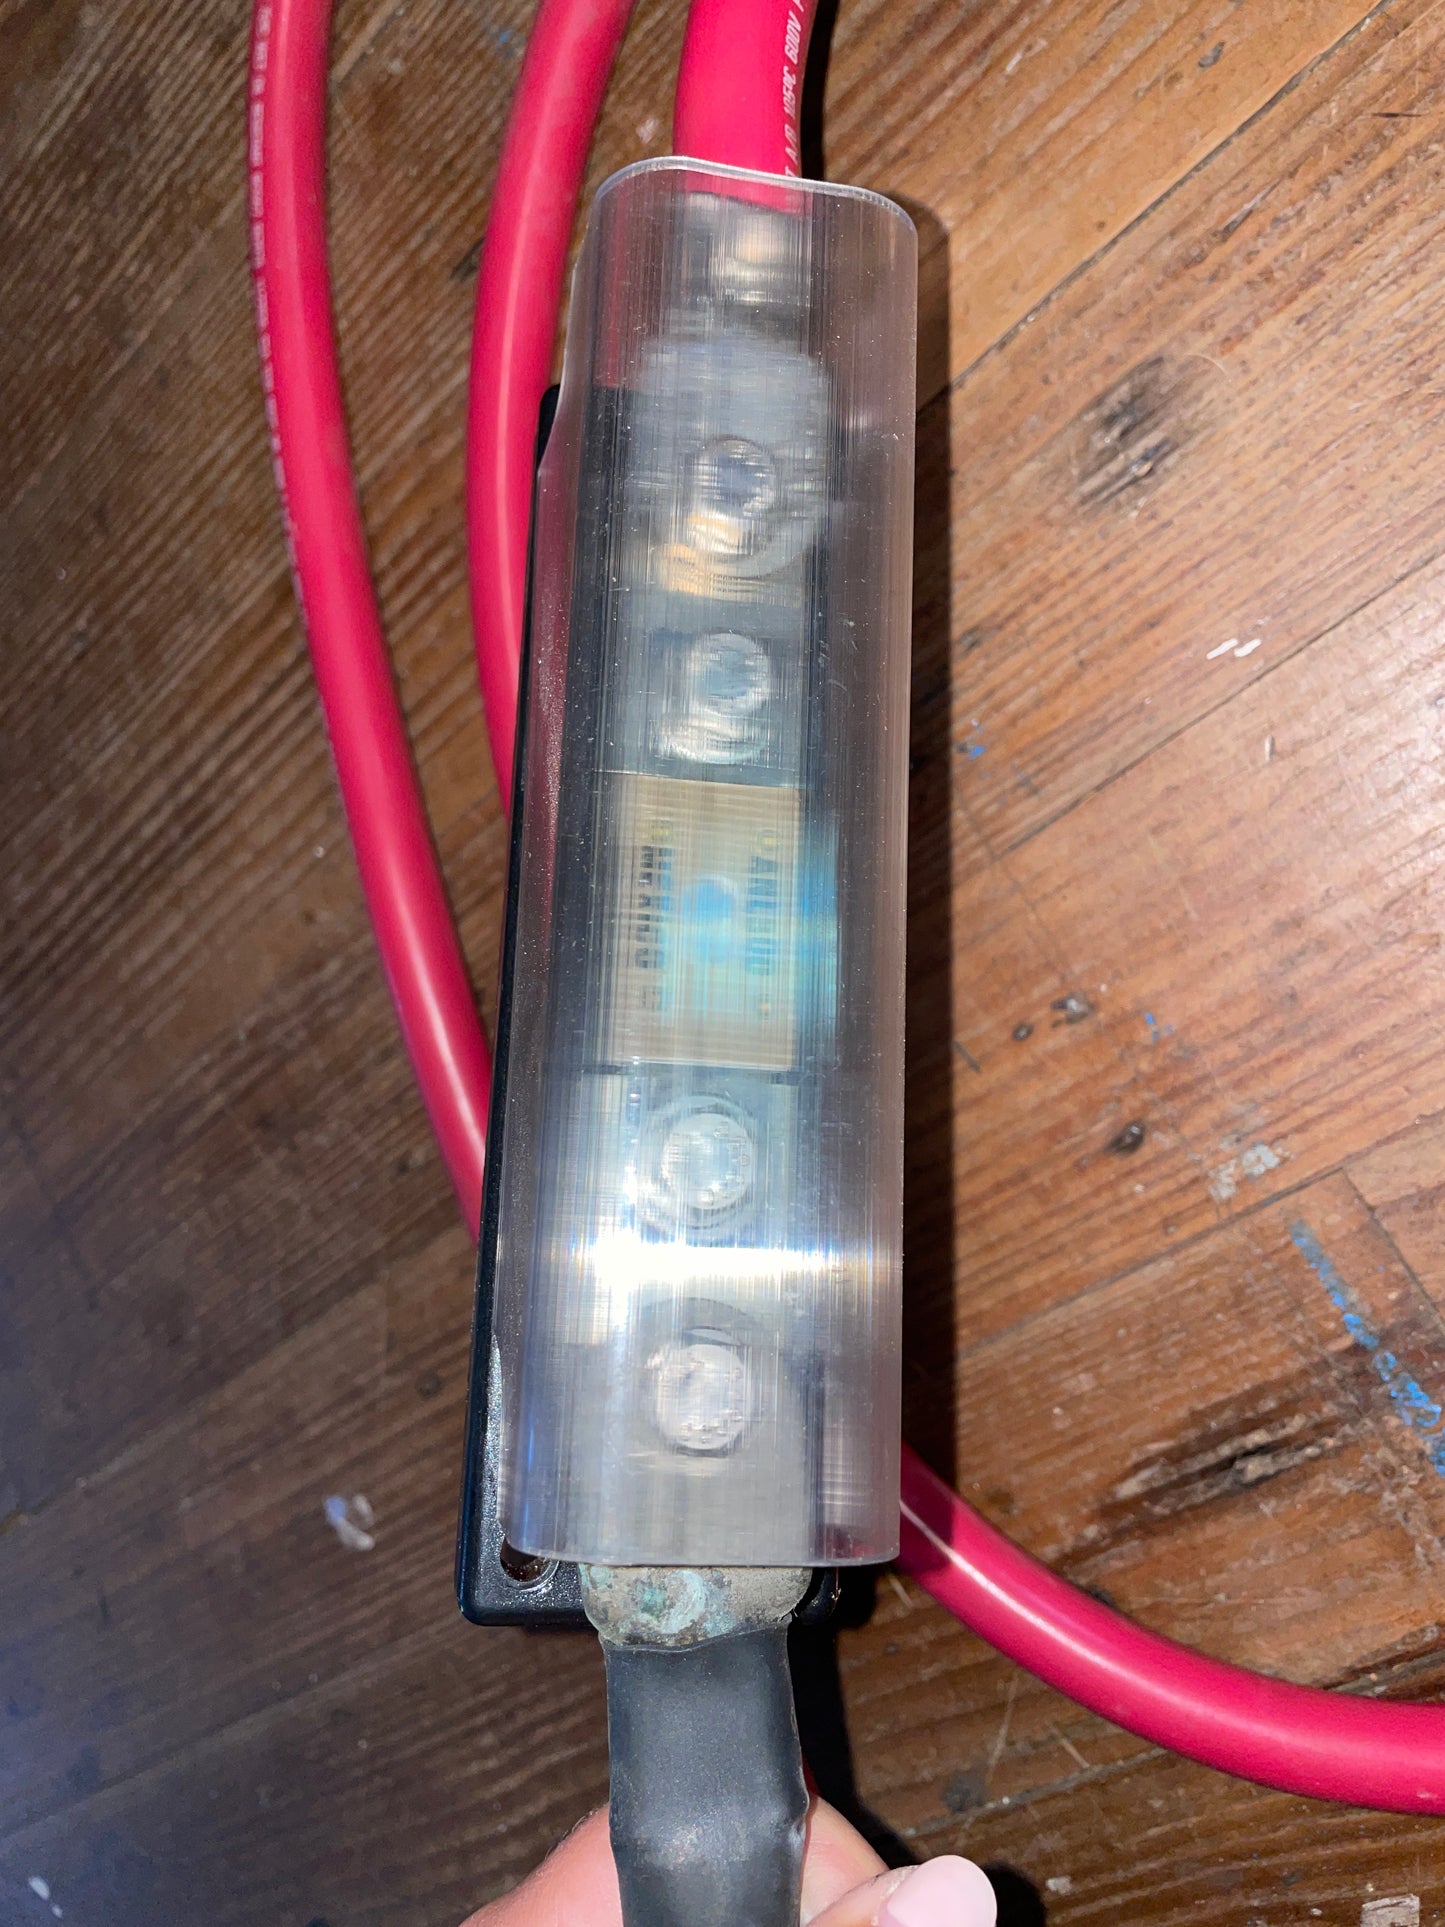 Single Circuit Blue Sea Systems Battery Switch With about 8’ Copper Wiring